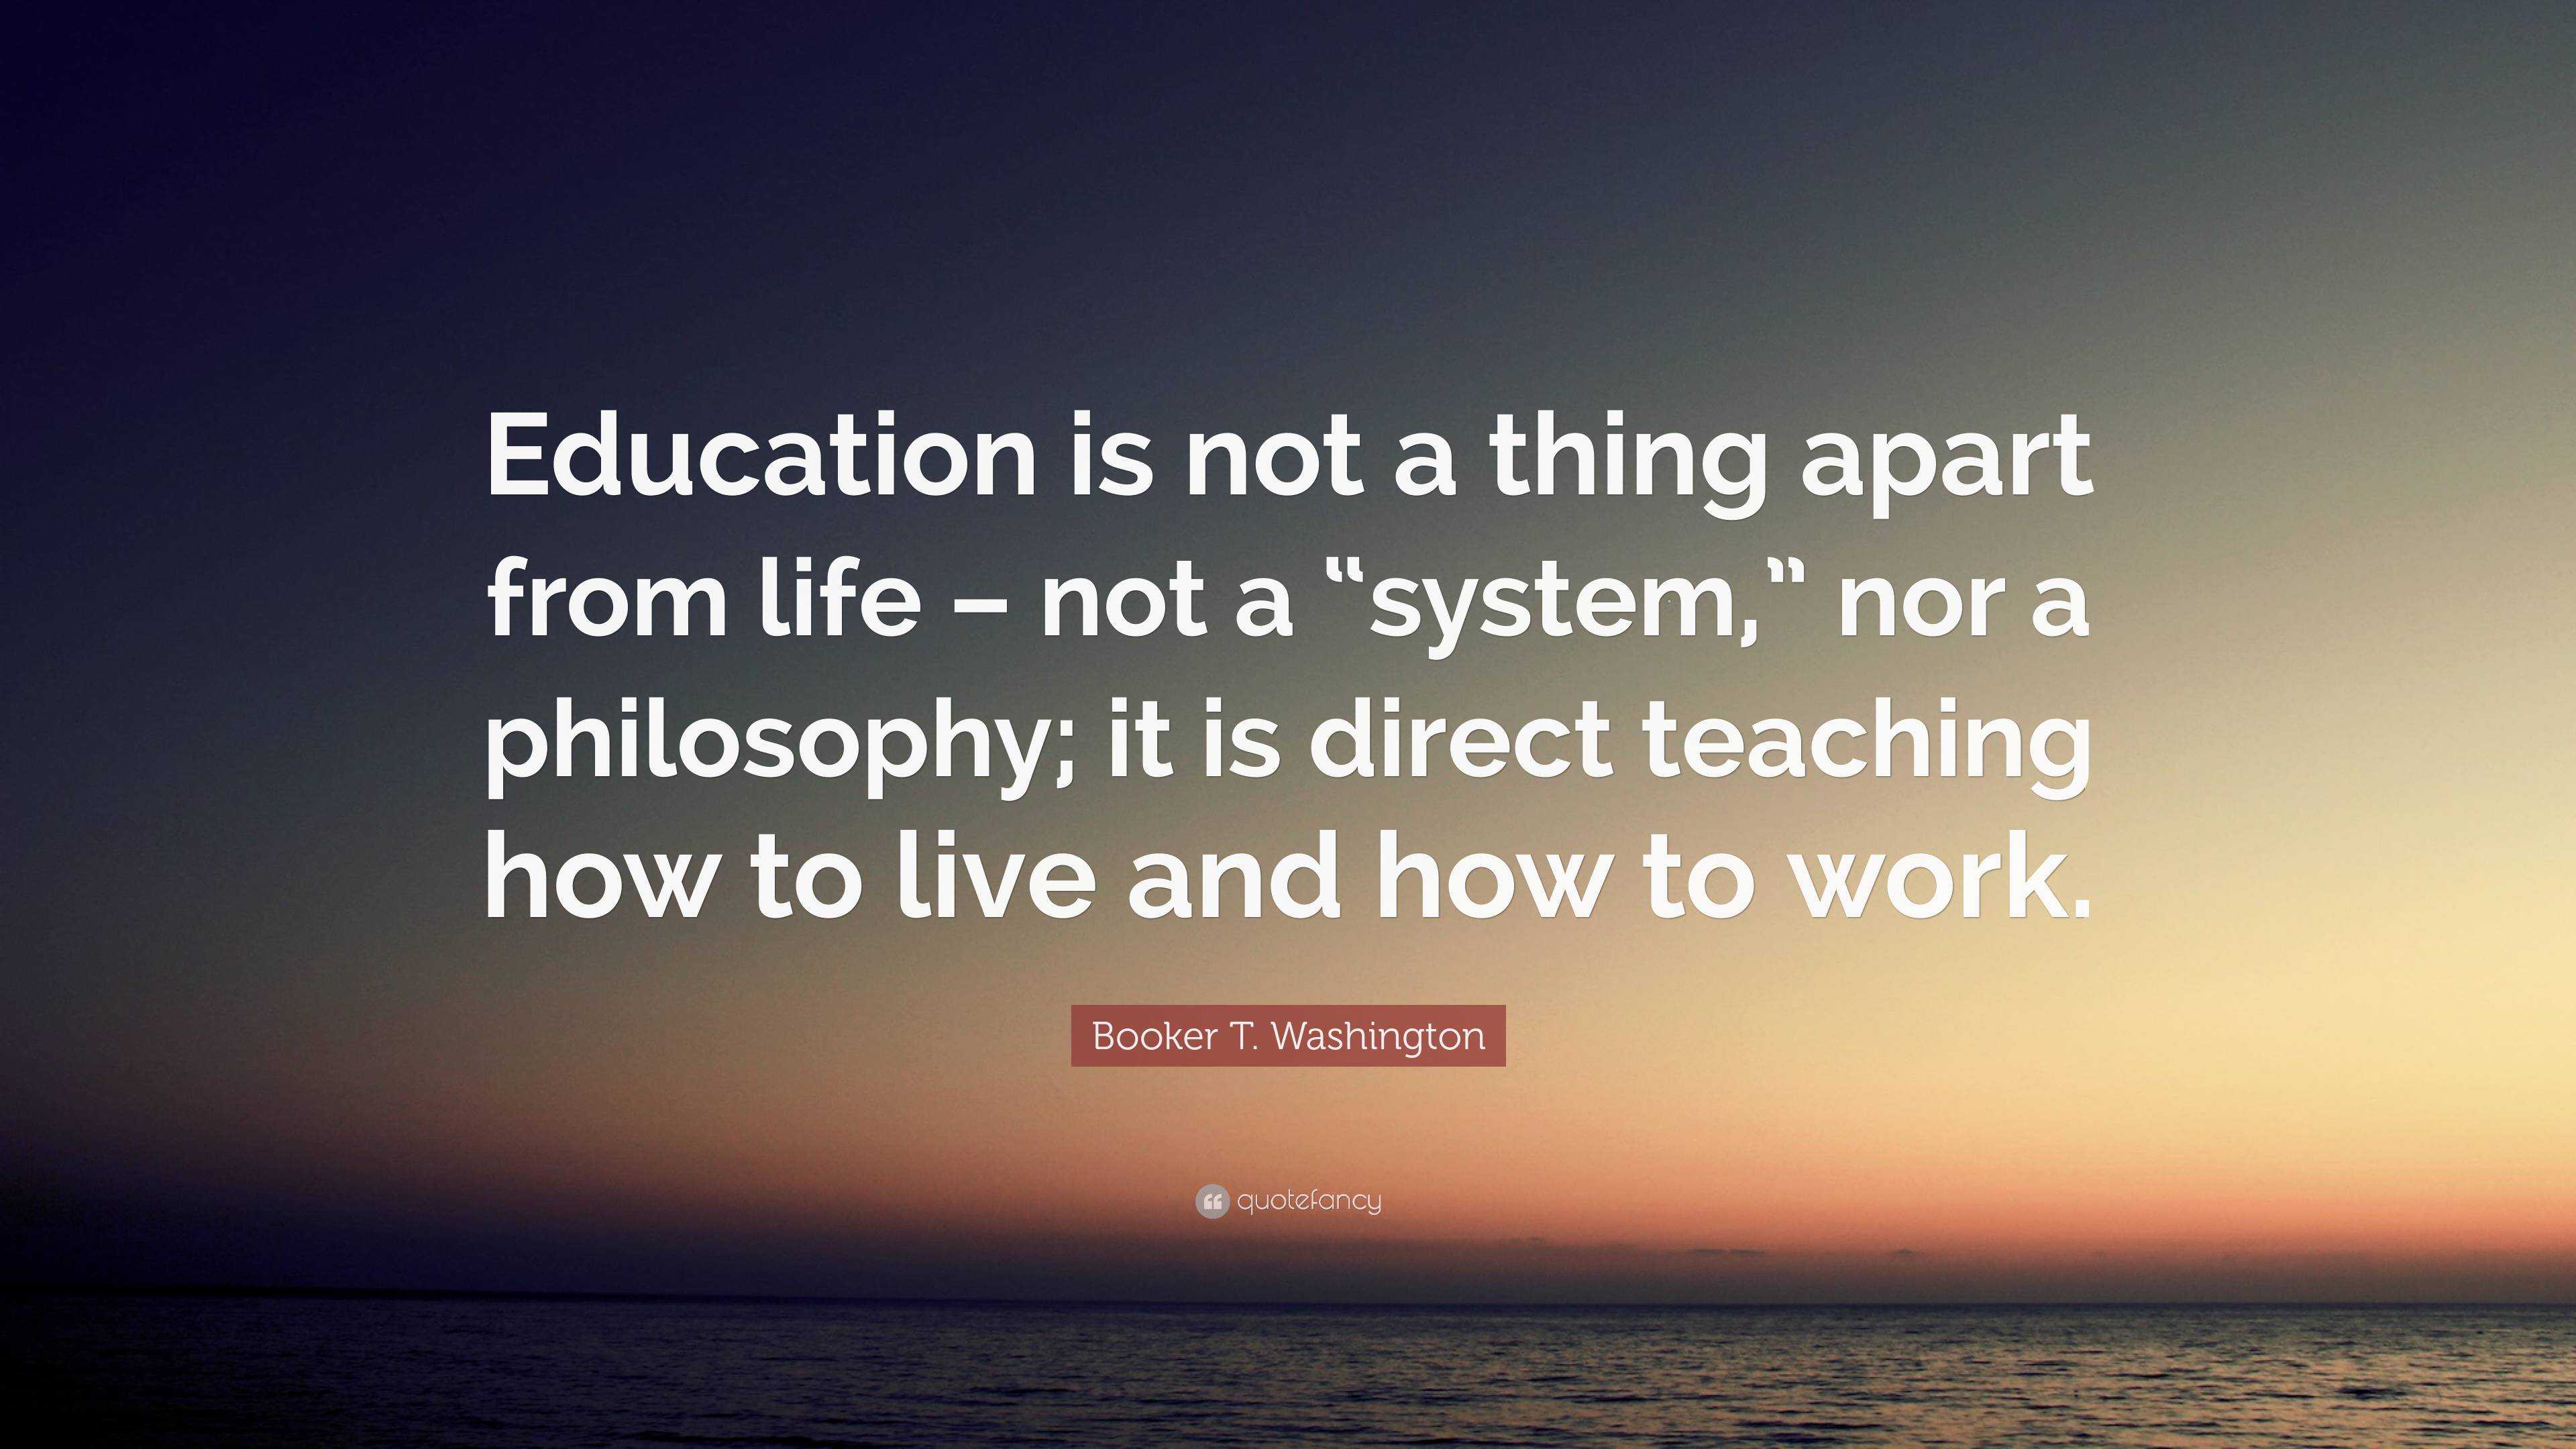 Booker T. Washington Quote: “Education is not a thing apart from life ...